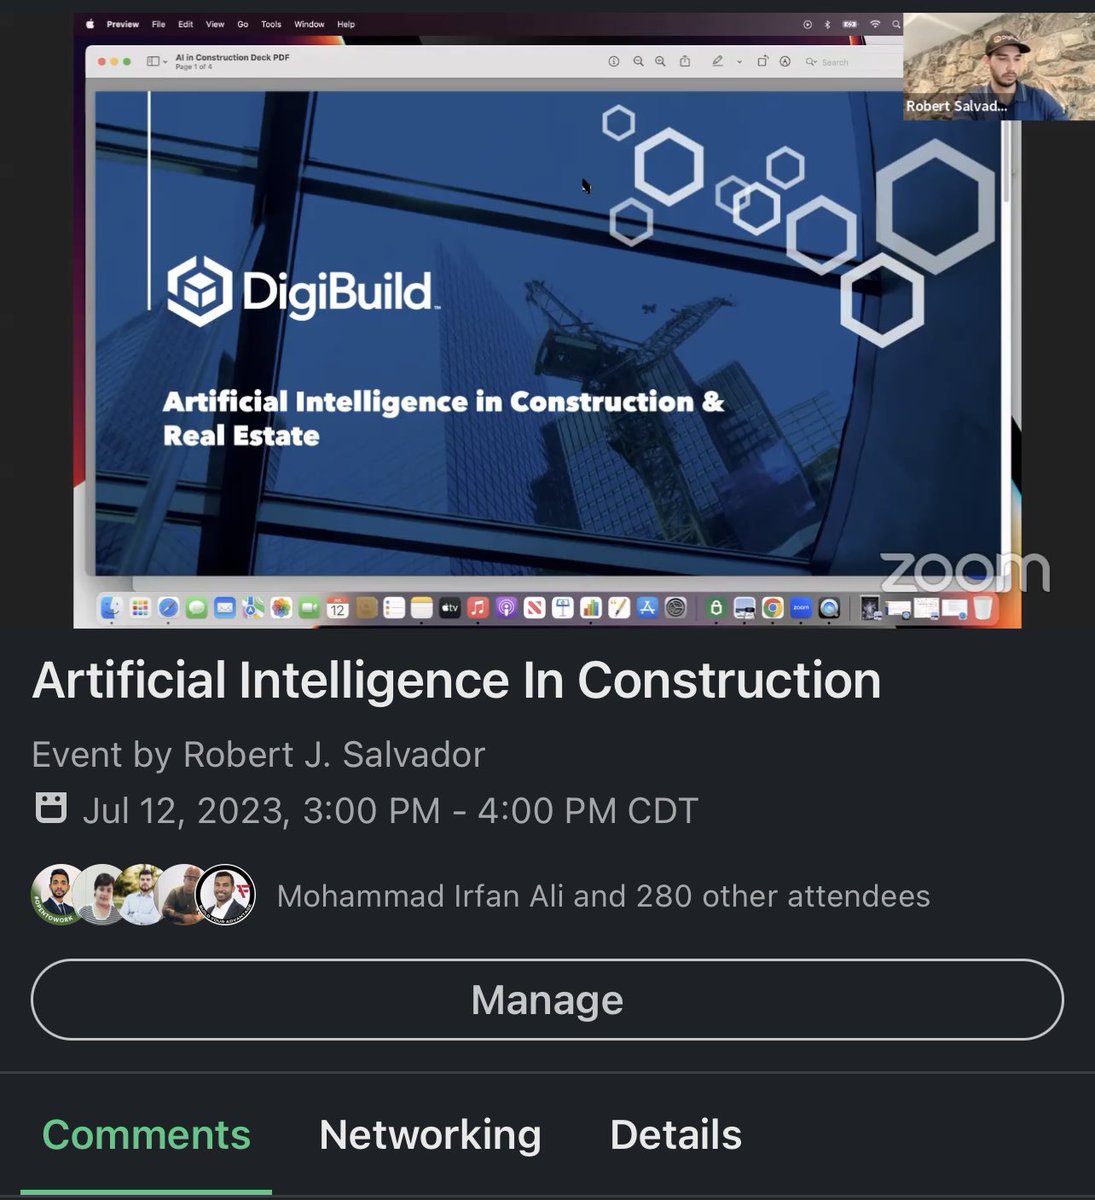 @elonmusk We held the largest AI in construction and real estate webinar on LinkedIn thus far this year. When @Twitter jobs Elon so we can bring it here.